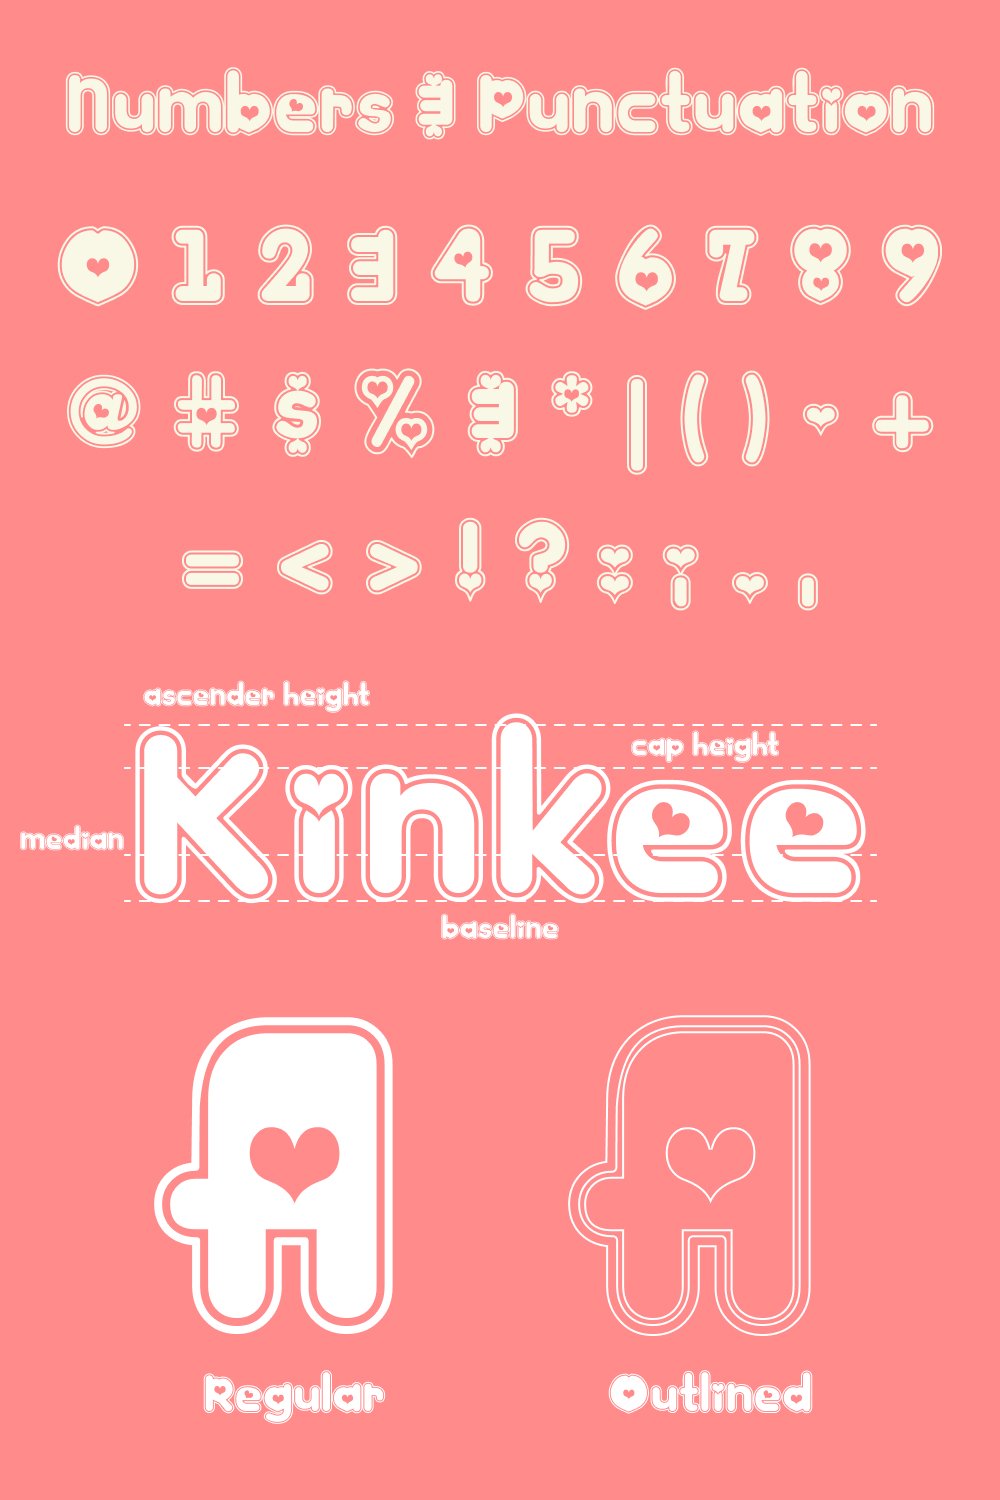 Numbers and punctuation of kinkee heart font.